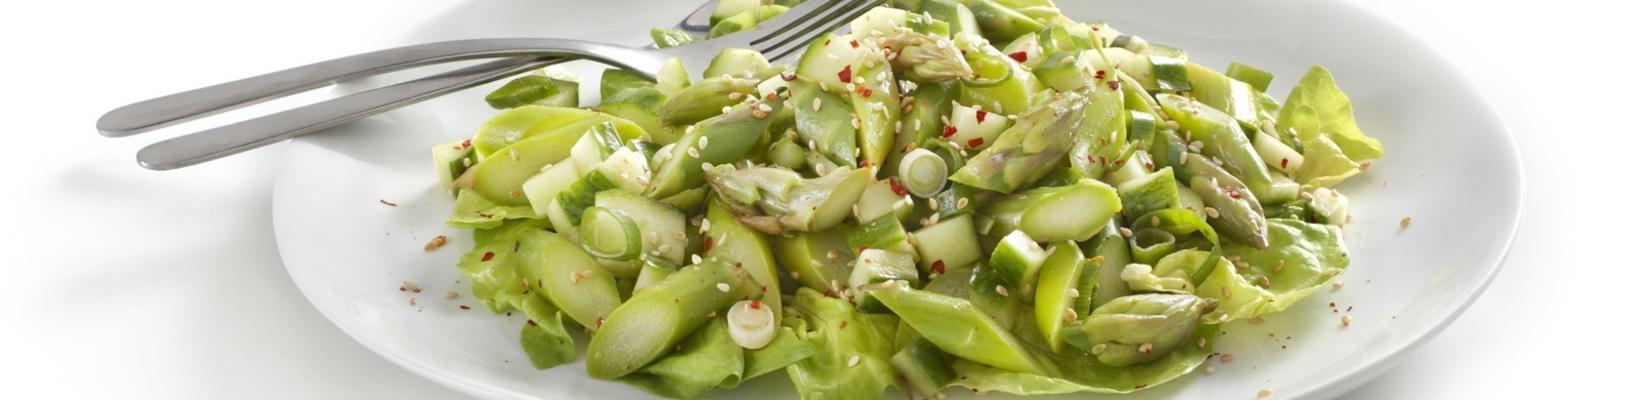 green asparagus salad with japanese dressing